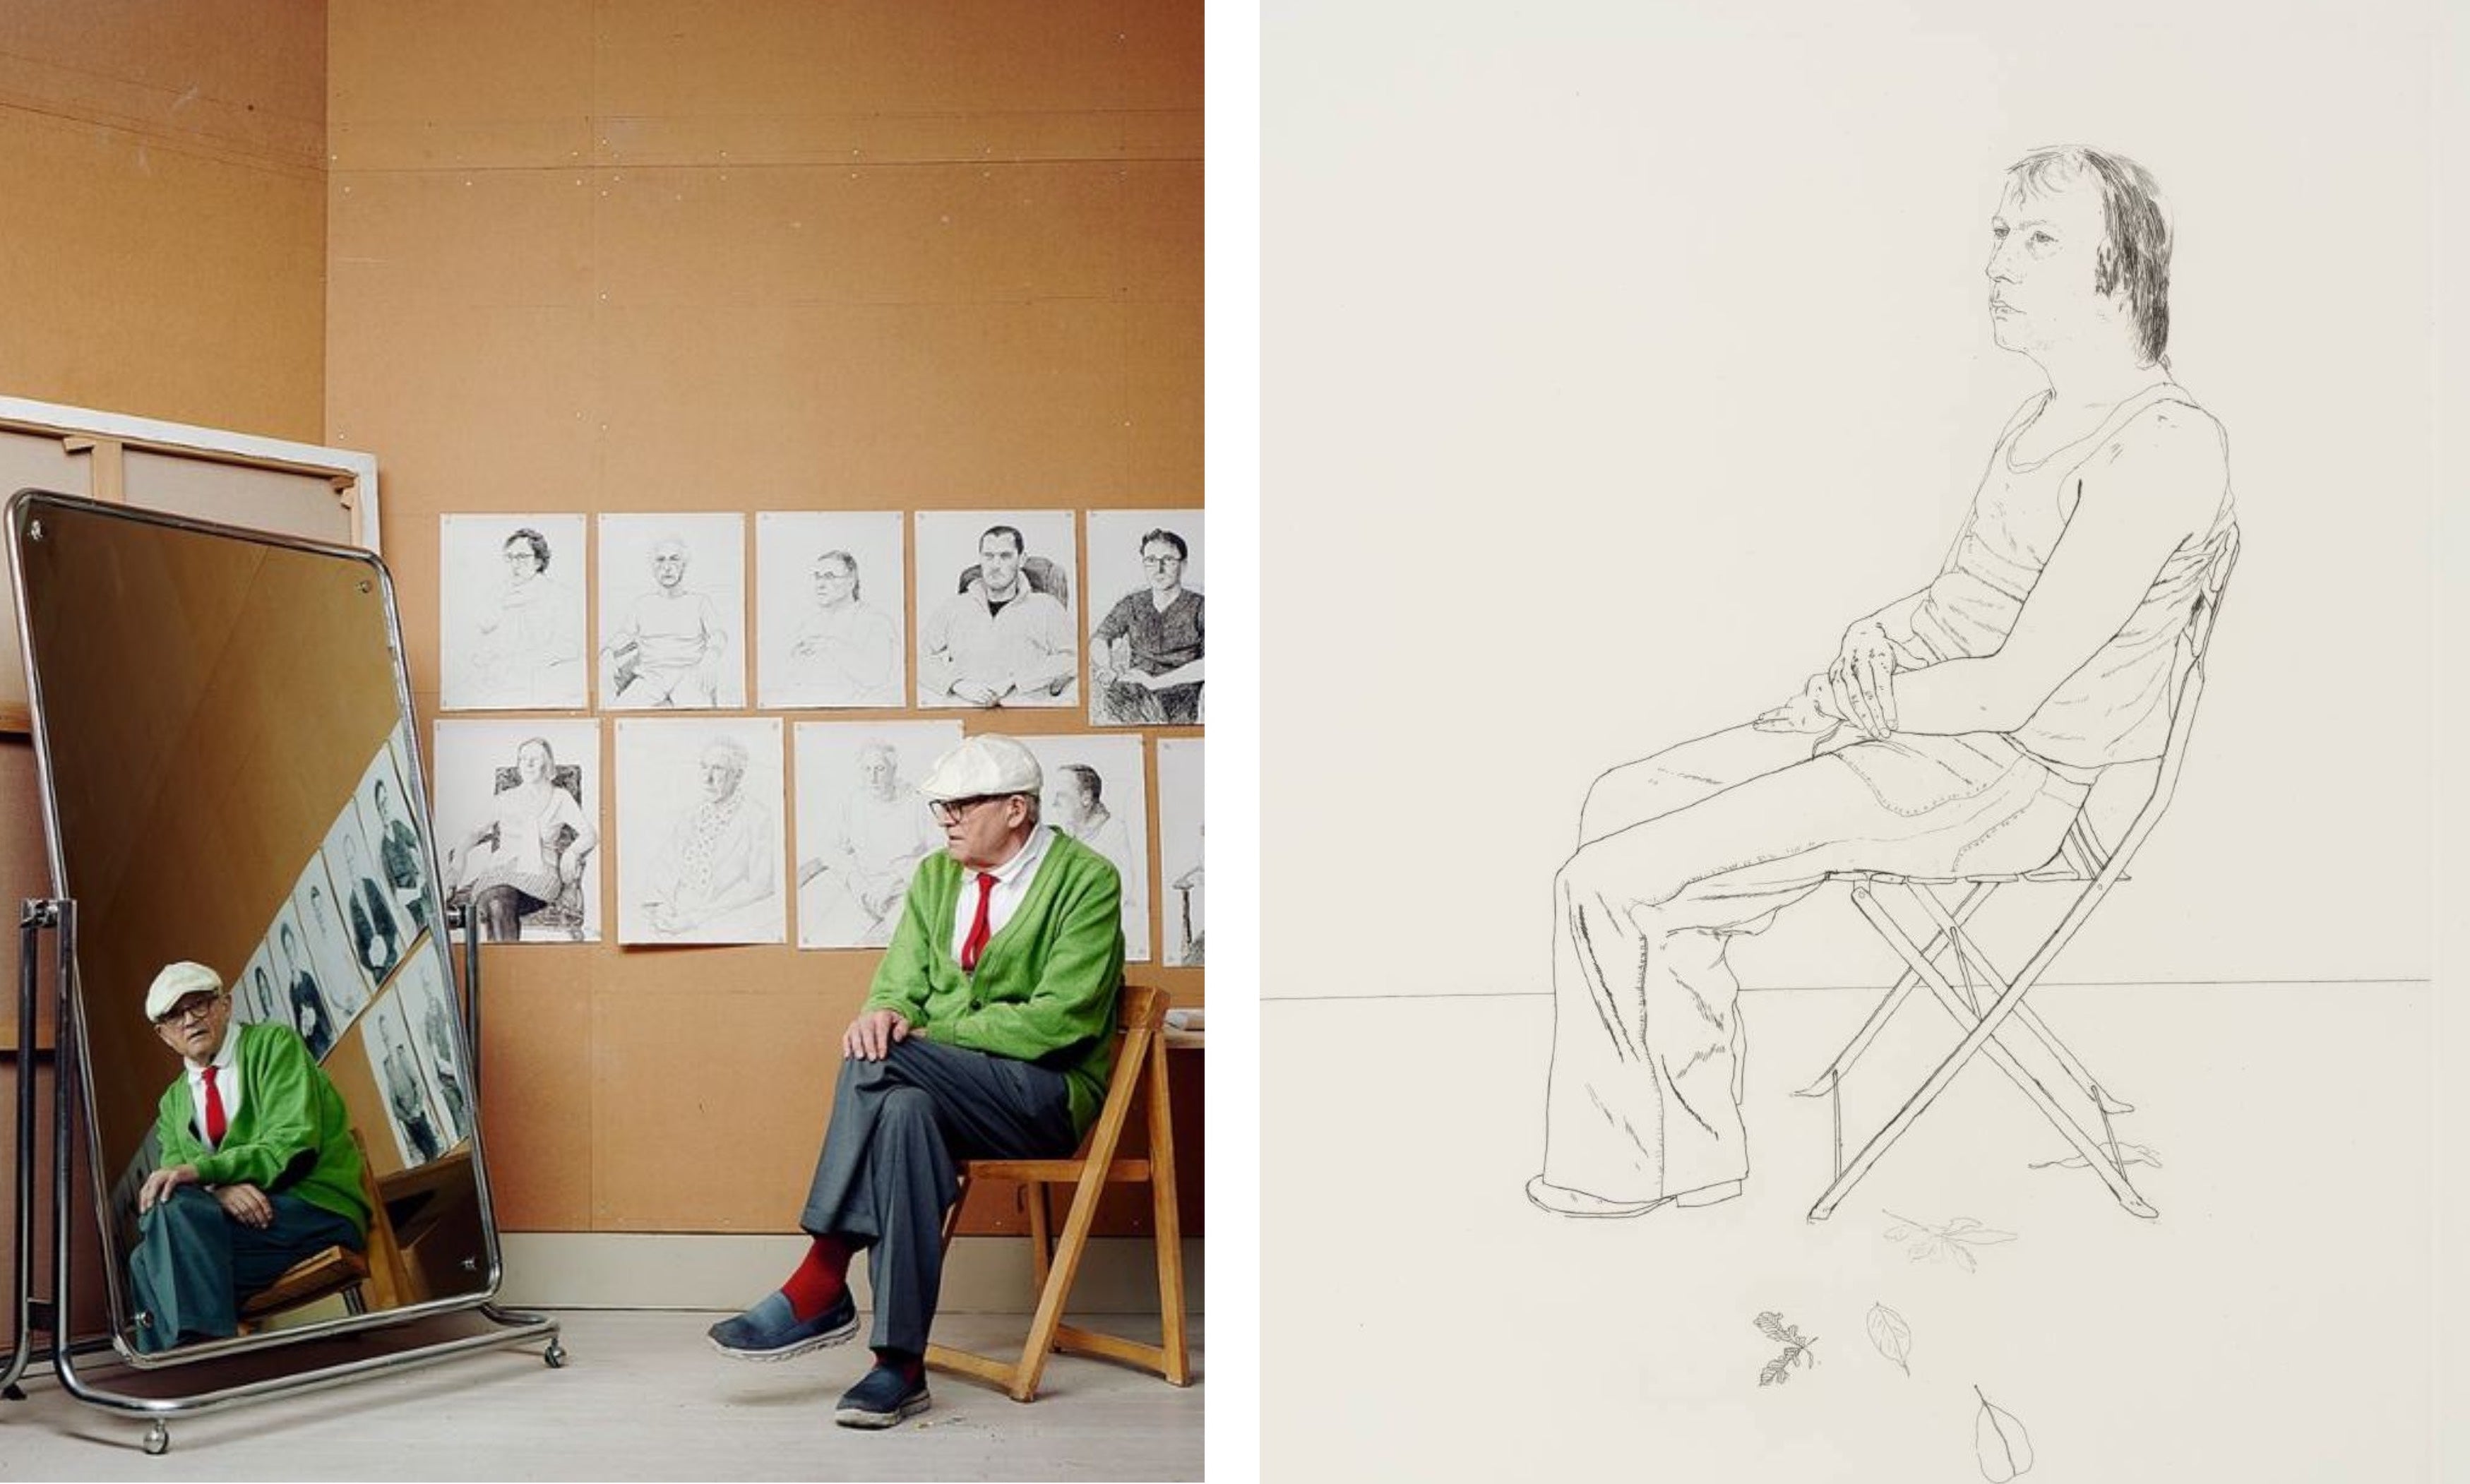 Left: Hockney in his studio, The Guardian, 2016. Right: Mo with Five Leaves, 1971